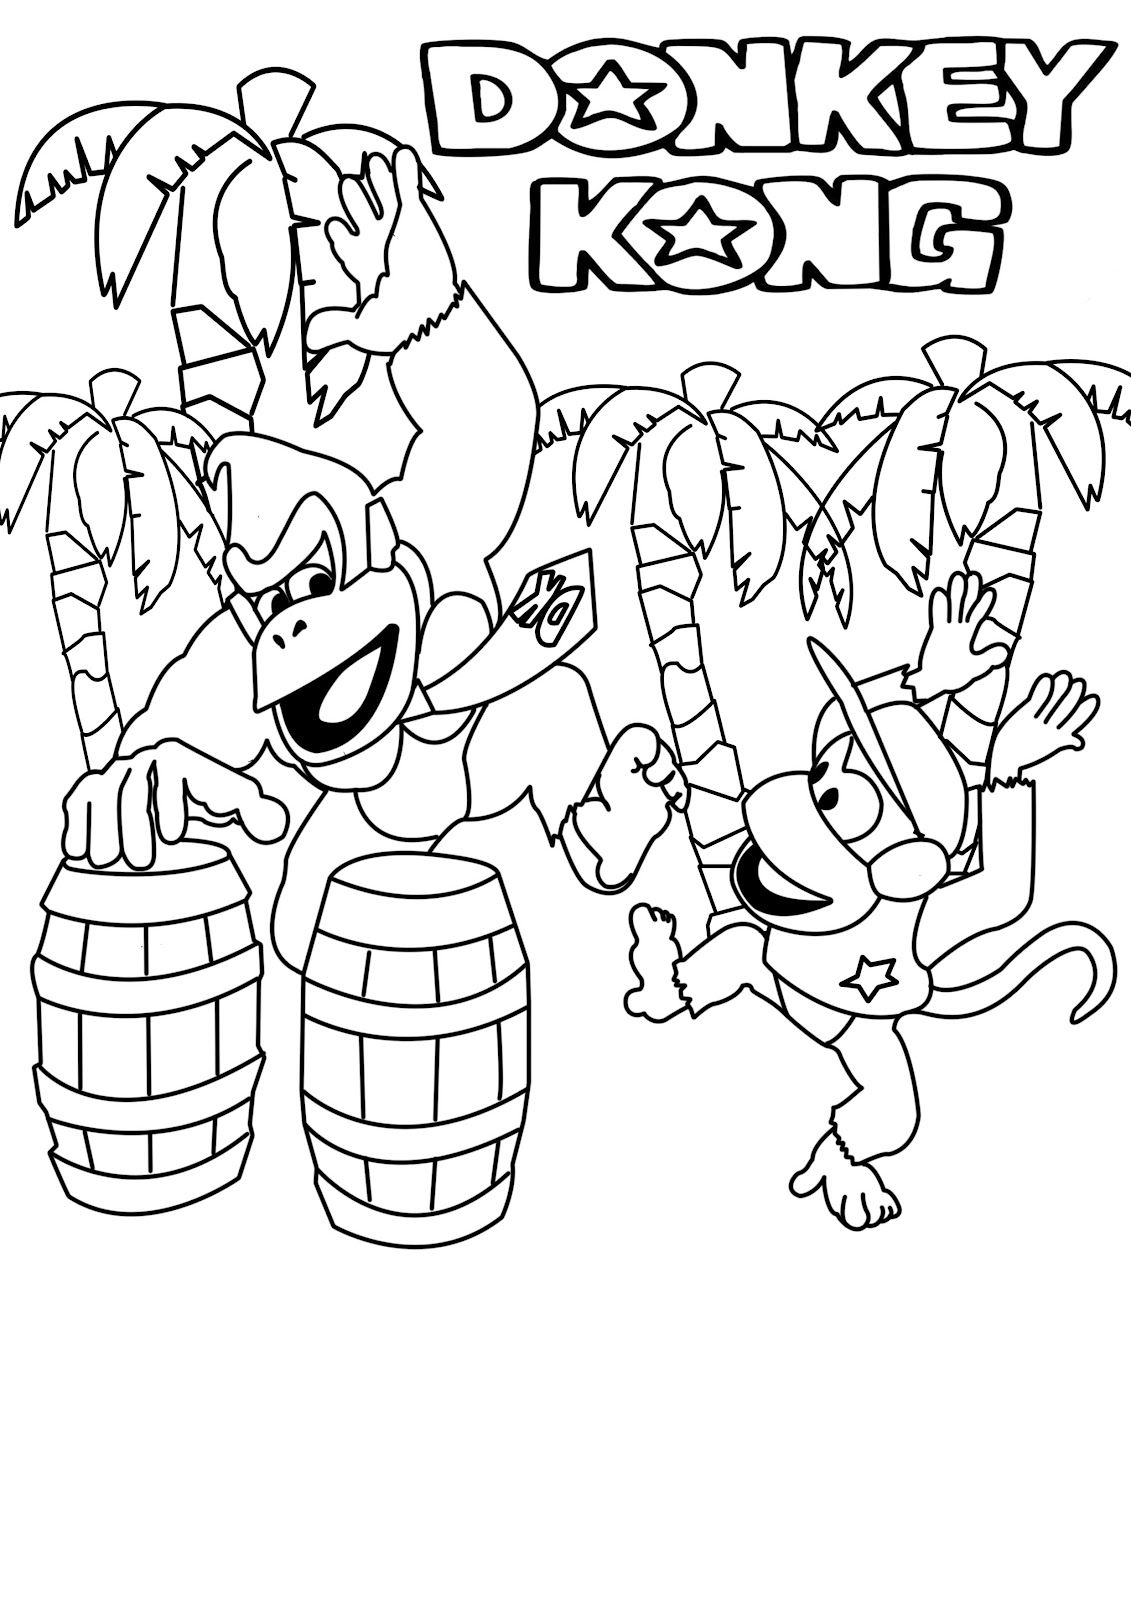 Donkey Kong 20 Coloring Pages   Donkey Kong Coloring Pages ...